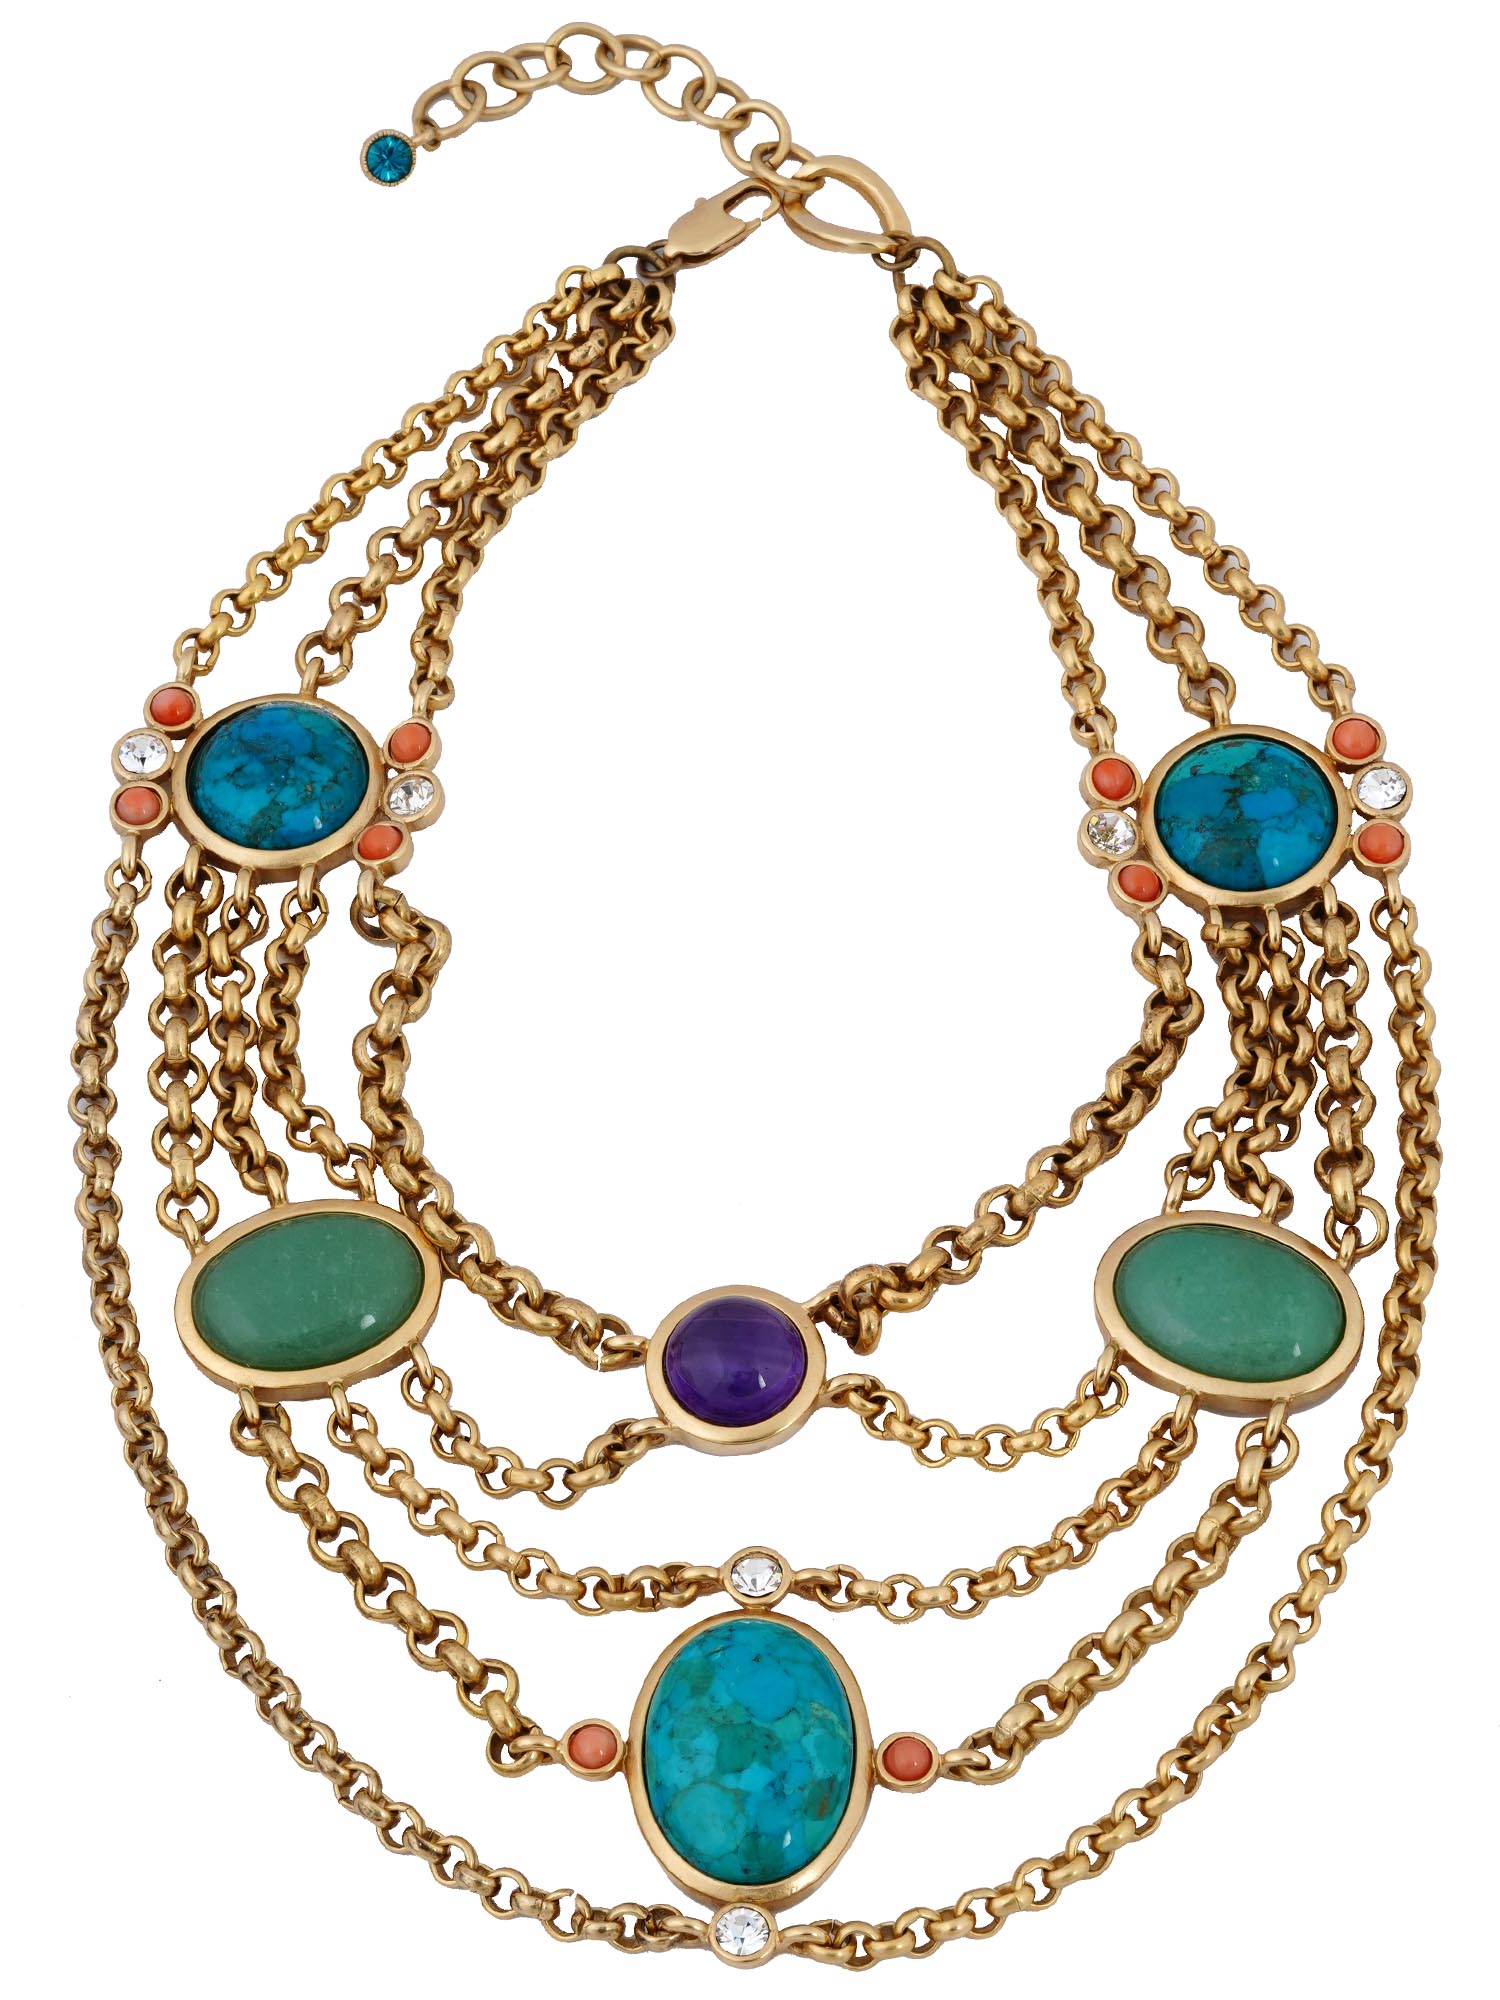 JUDITH LEIBER SHEBA GOLD PLATED COLLAR NECKLACE PIC-2